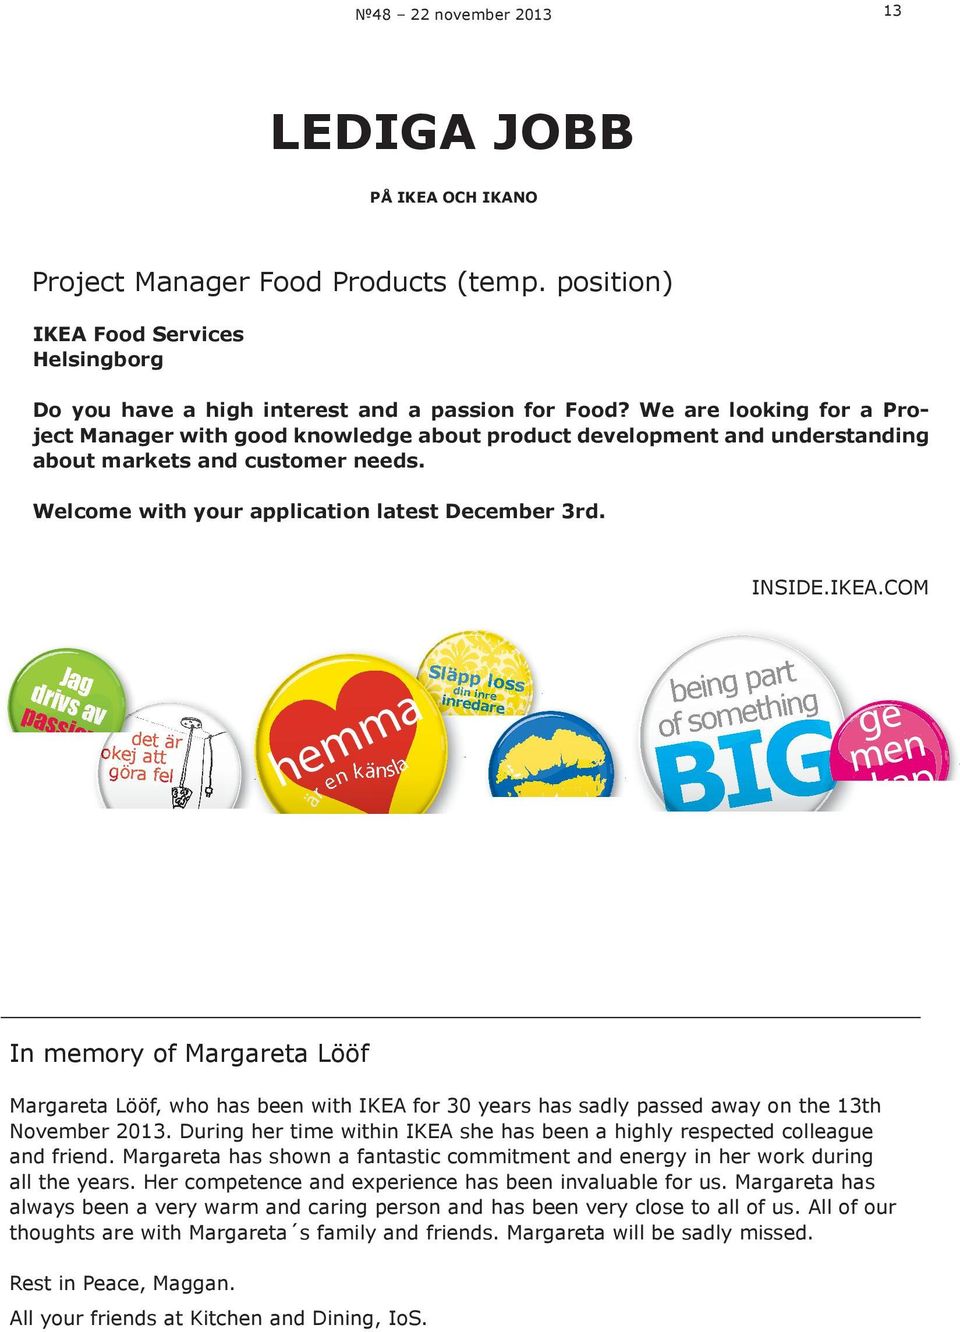 We are looking for a Project Manager with good knowledge about product development and understanding about markets and customer needs. Welcome with your application latest December 3rd. INSIDE.IKEA.